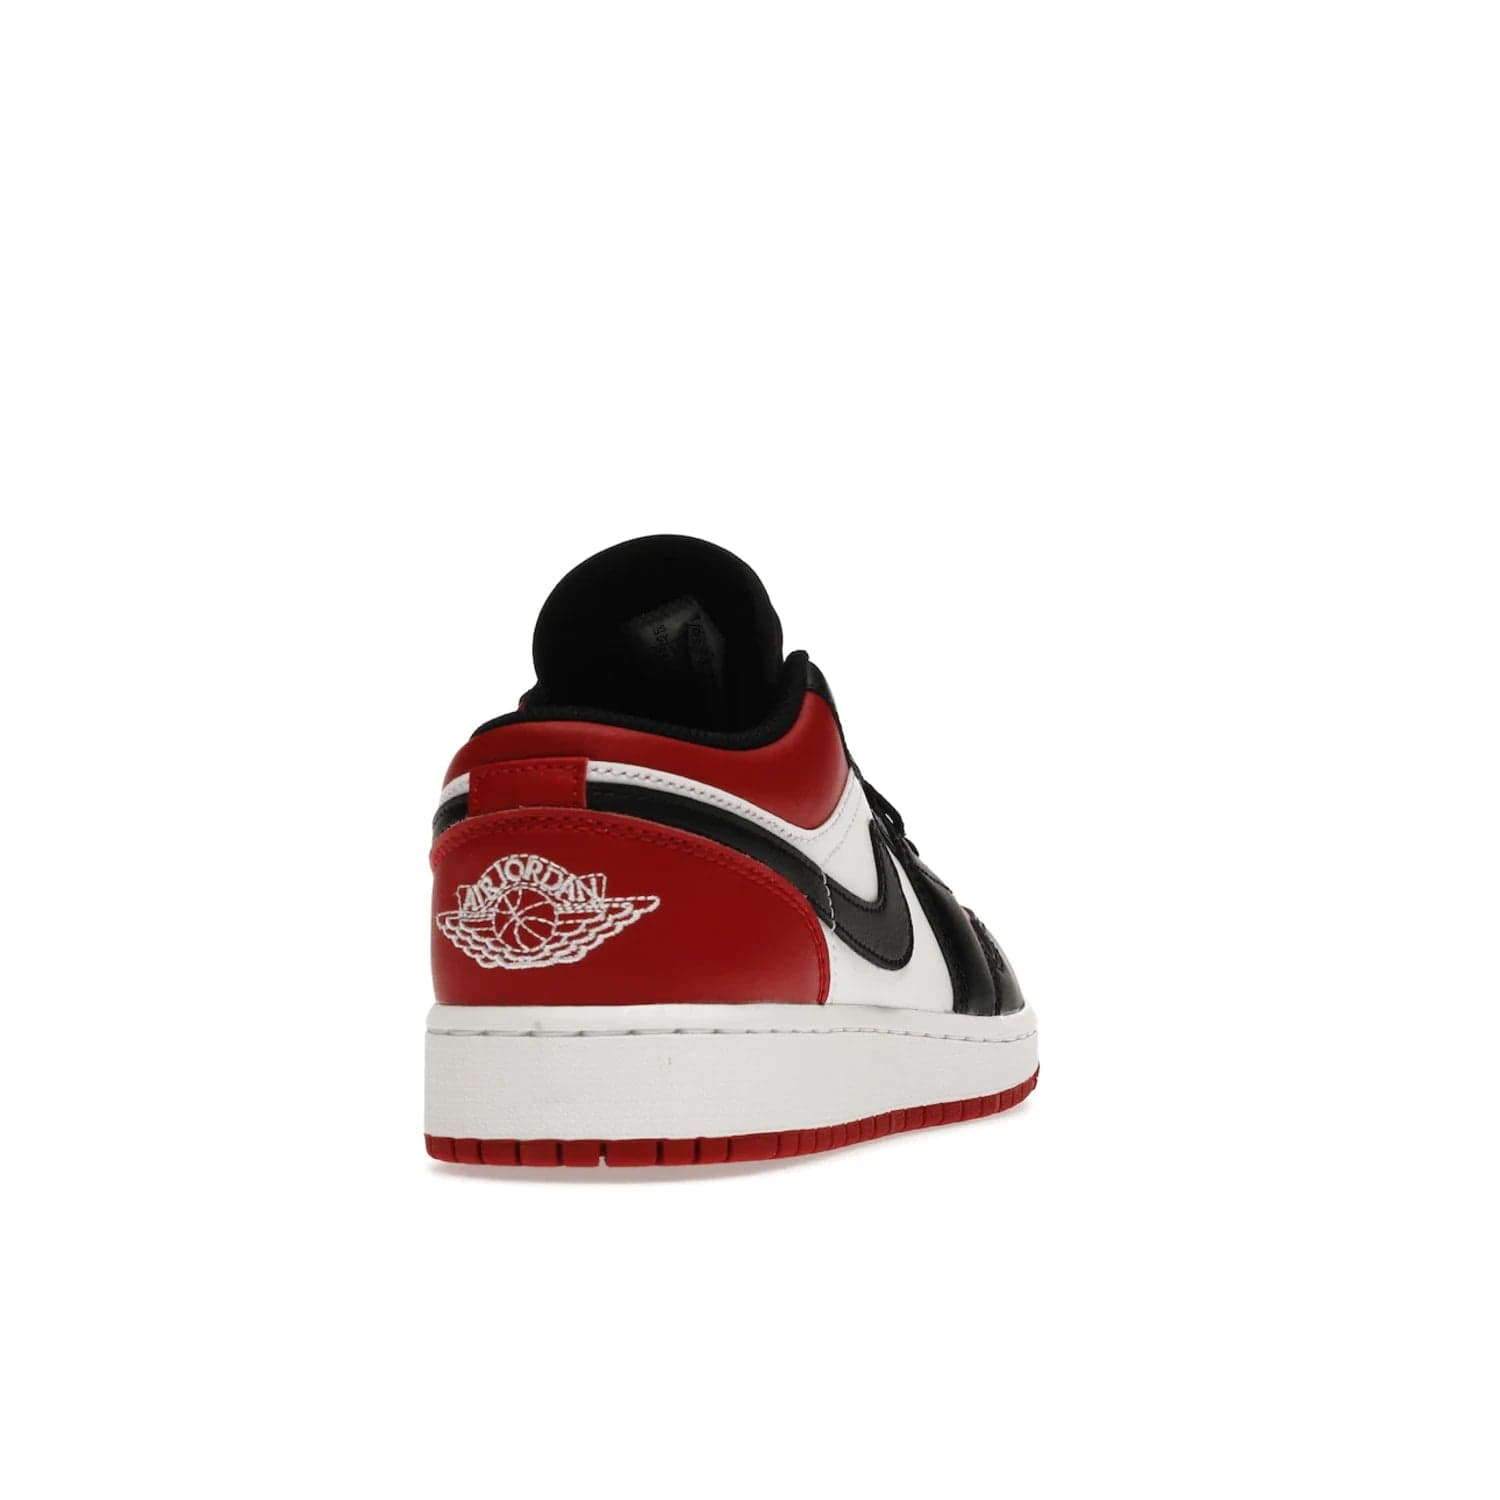 Jordan 1 Low Bred Toe (GS) - Image 30 - Only at www.BallersClubKickz.com - #
Iconic sneaker from Jordan brand with classic colorway, unique detailing & Air Jordan Wings logo. Step into the shoes of the greats with the Jordan 1 Low Bred Toe GS!